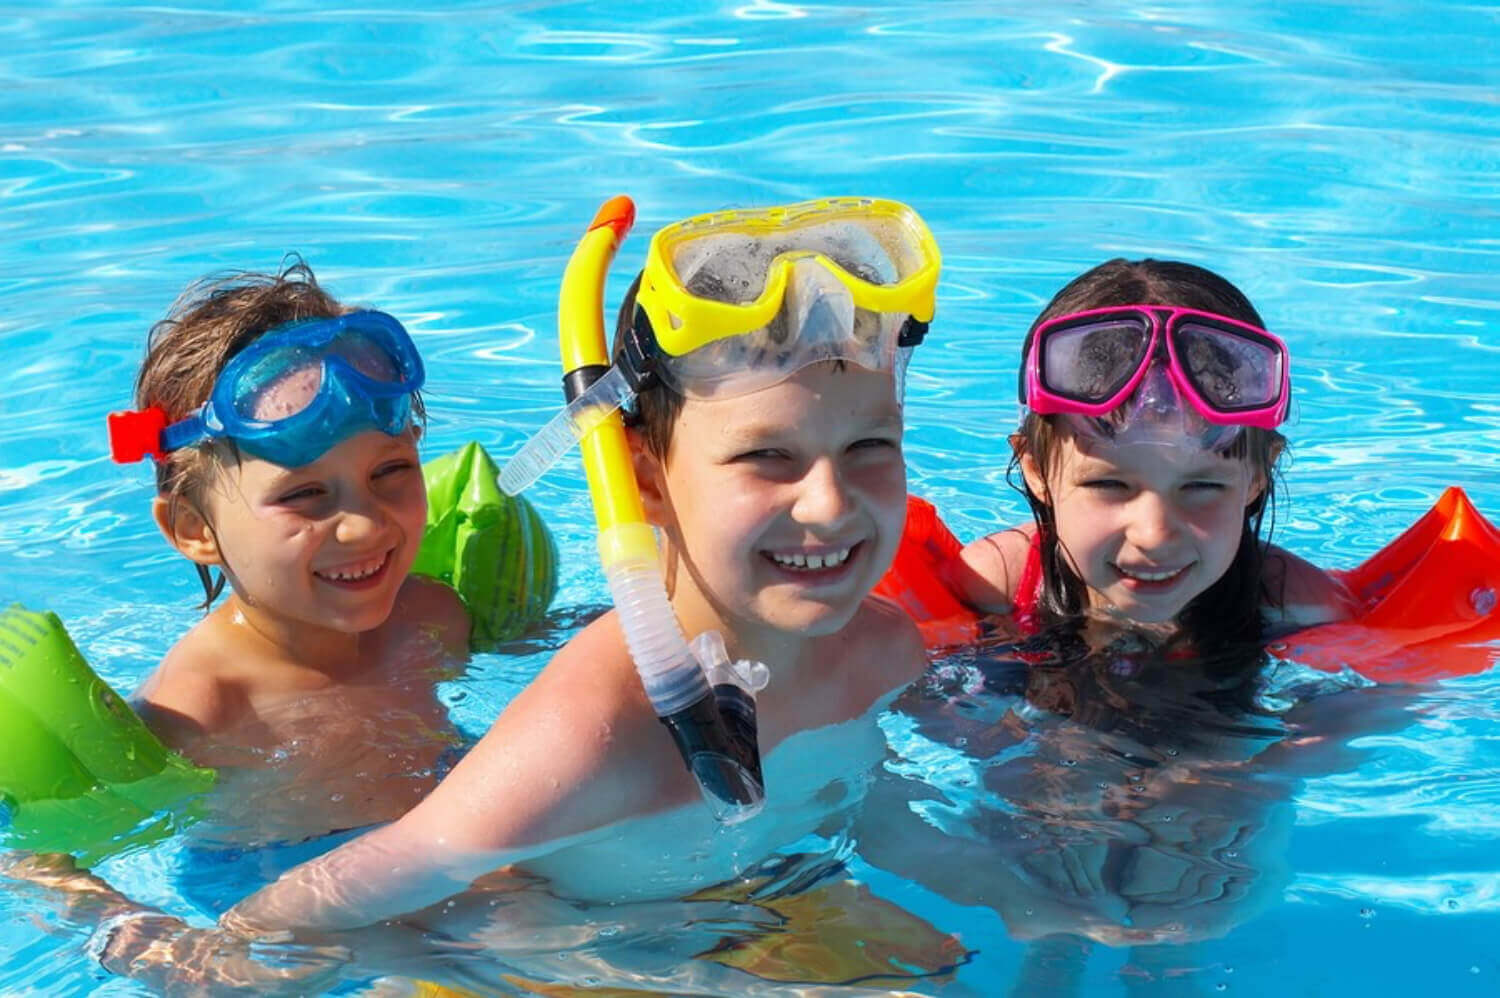 Children playing in a pool with snorkel gear.